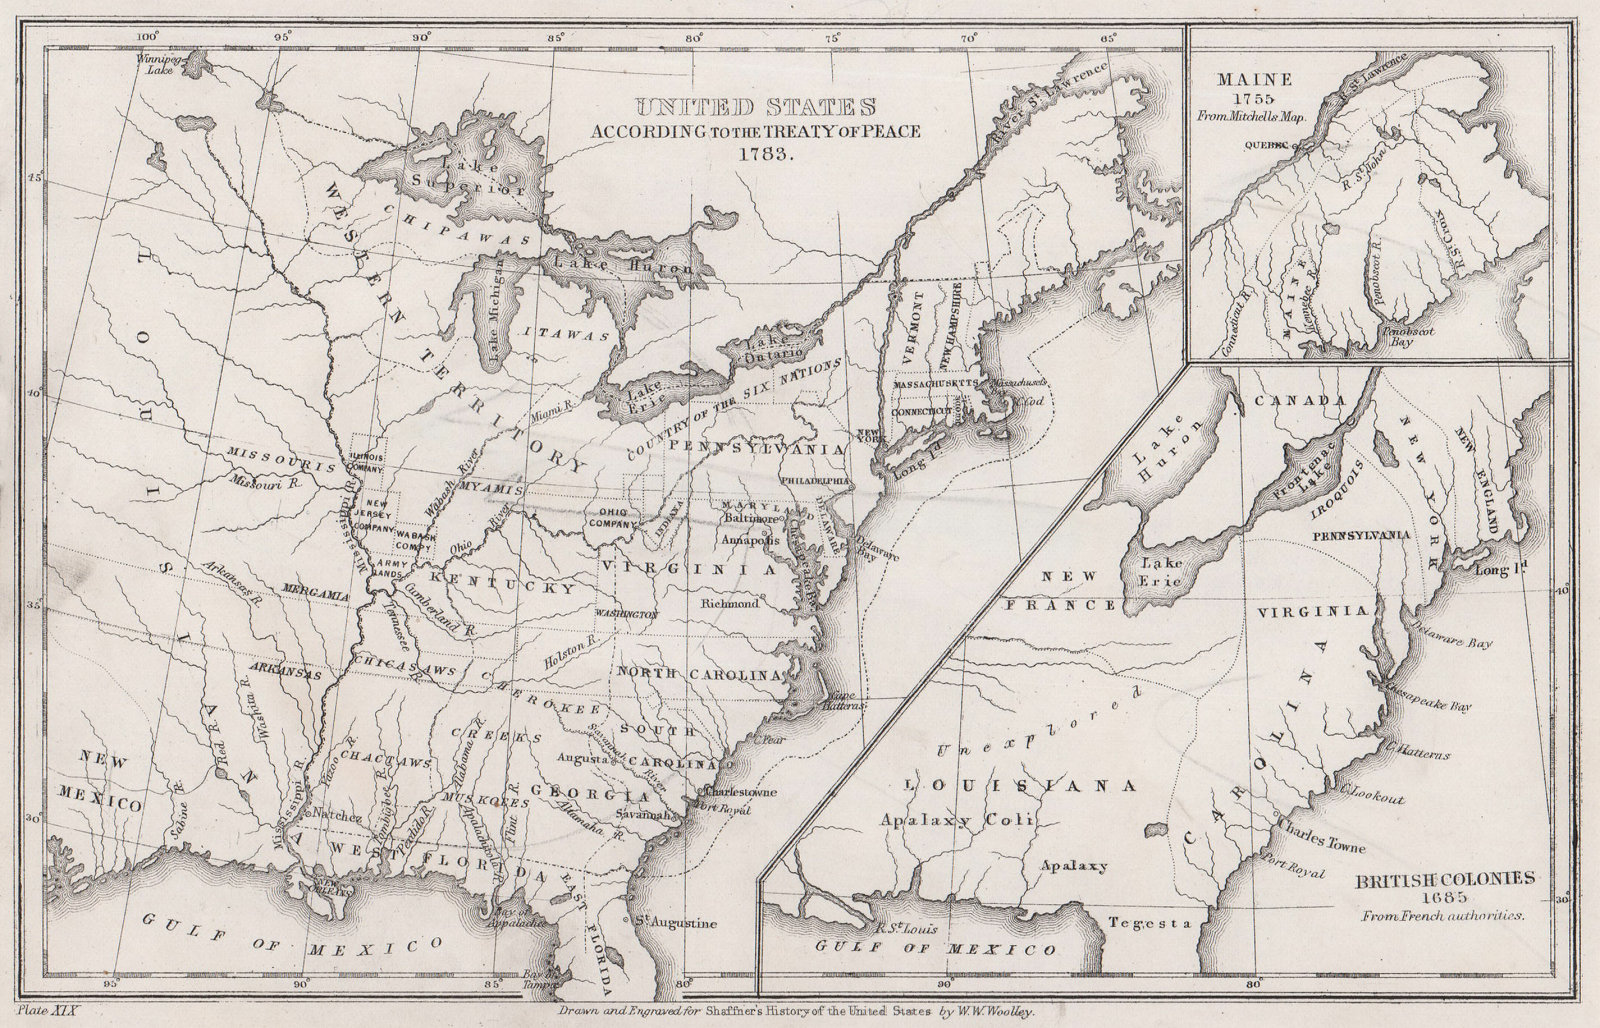 United States according to the 1783 Peace Treaty. British Colonies 1685 1863 map